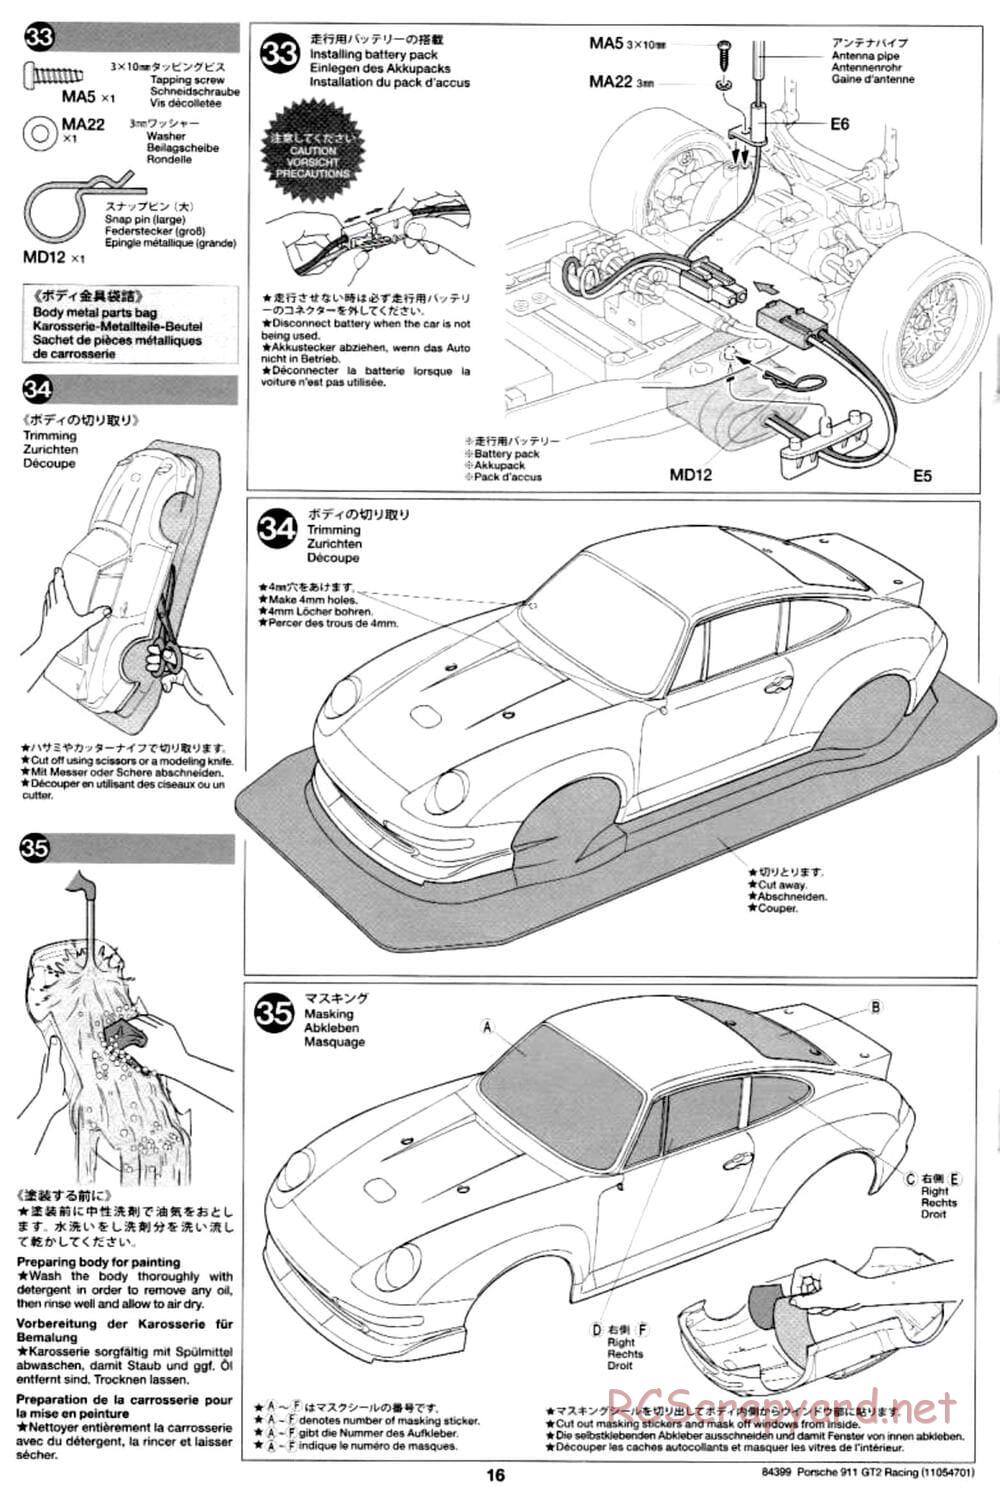 Tamiya - Porsche 911 GT2 Racing - TA02SW Chassis - Manual - Page 16